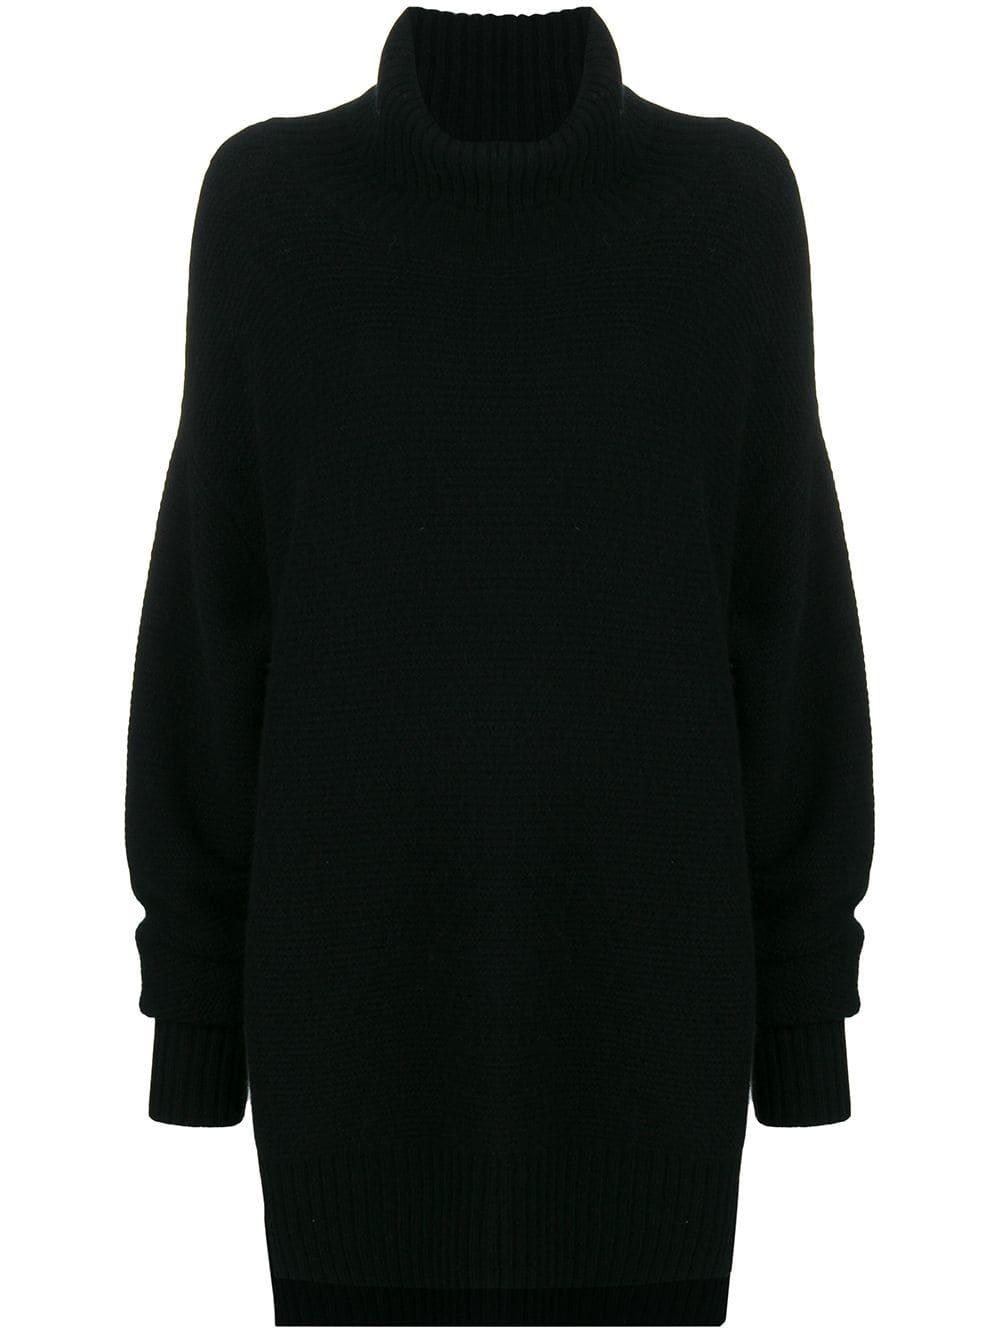 N.Peal Cashmere Cashmere Chunky-knit Sweater in Black - Lyst